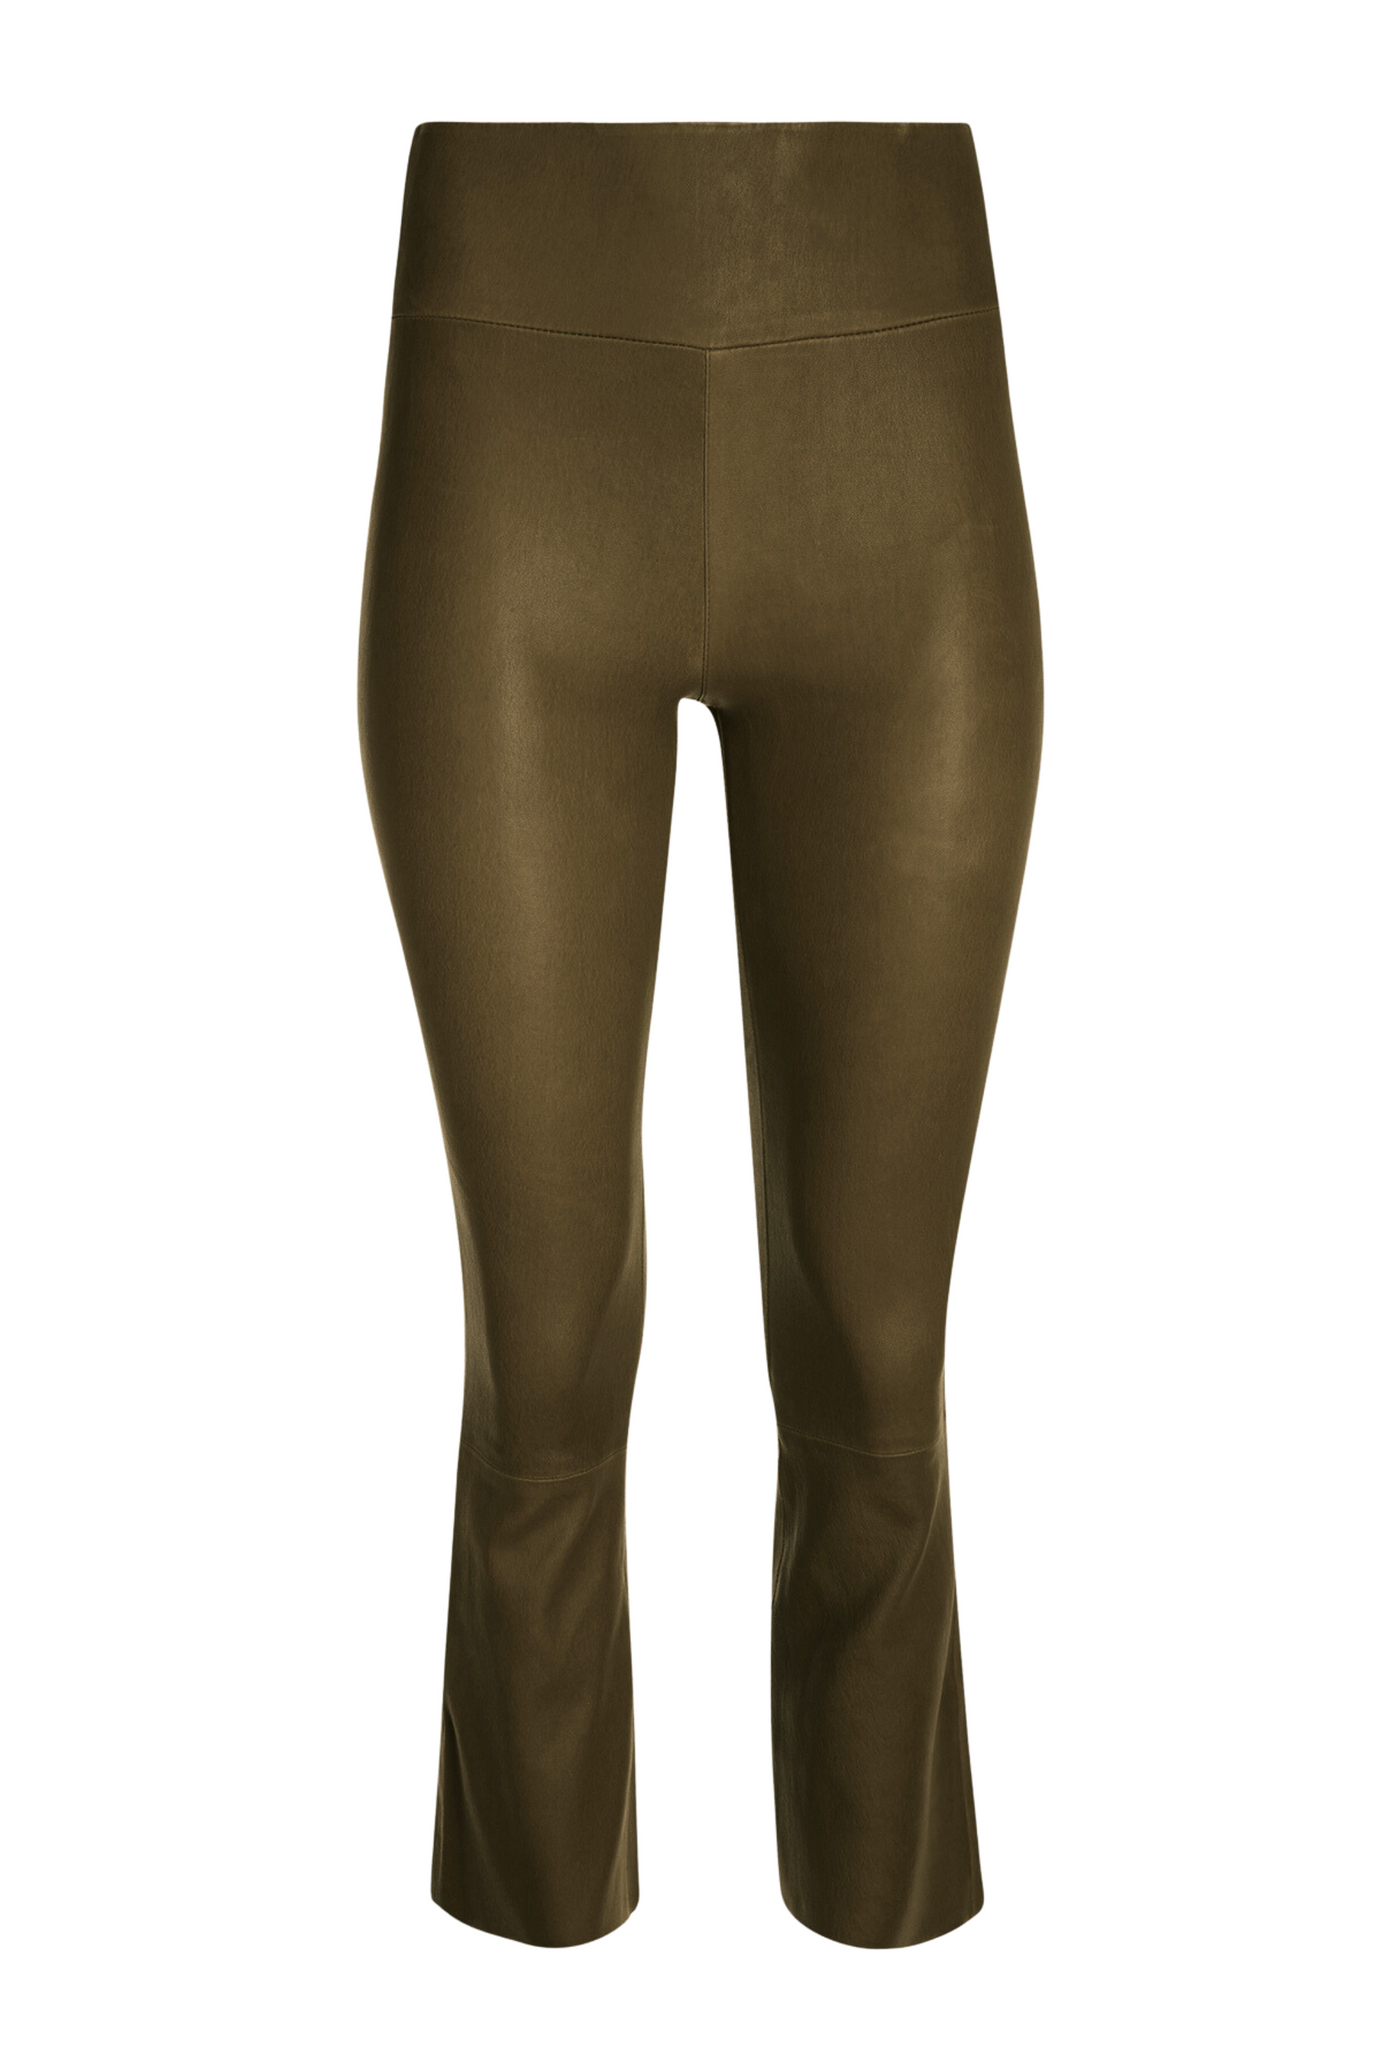 Moss Leather Crop Flare Leggings